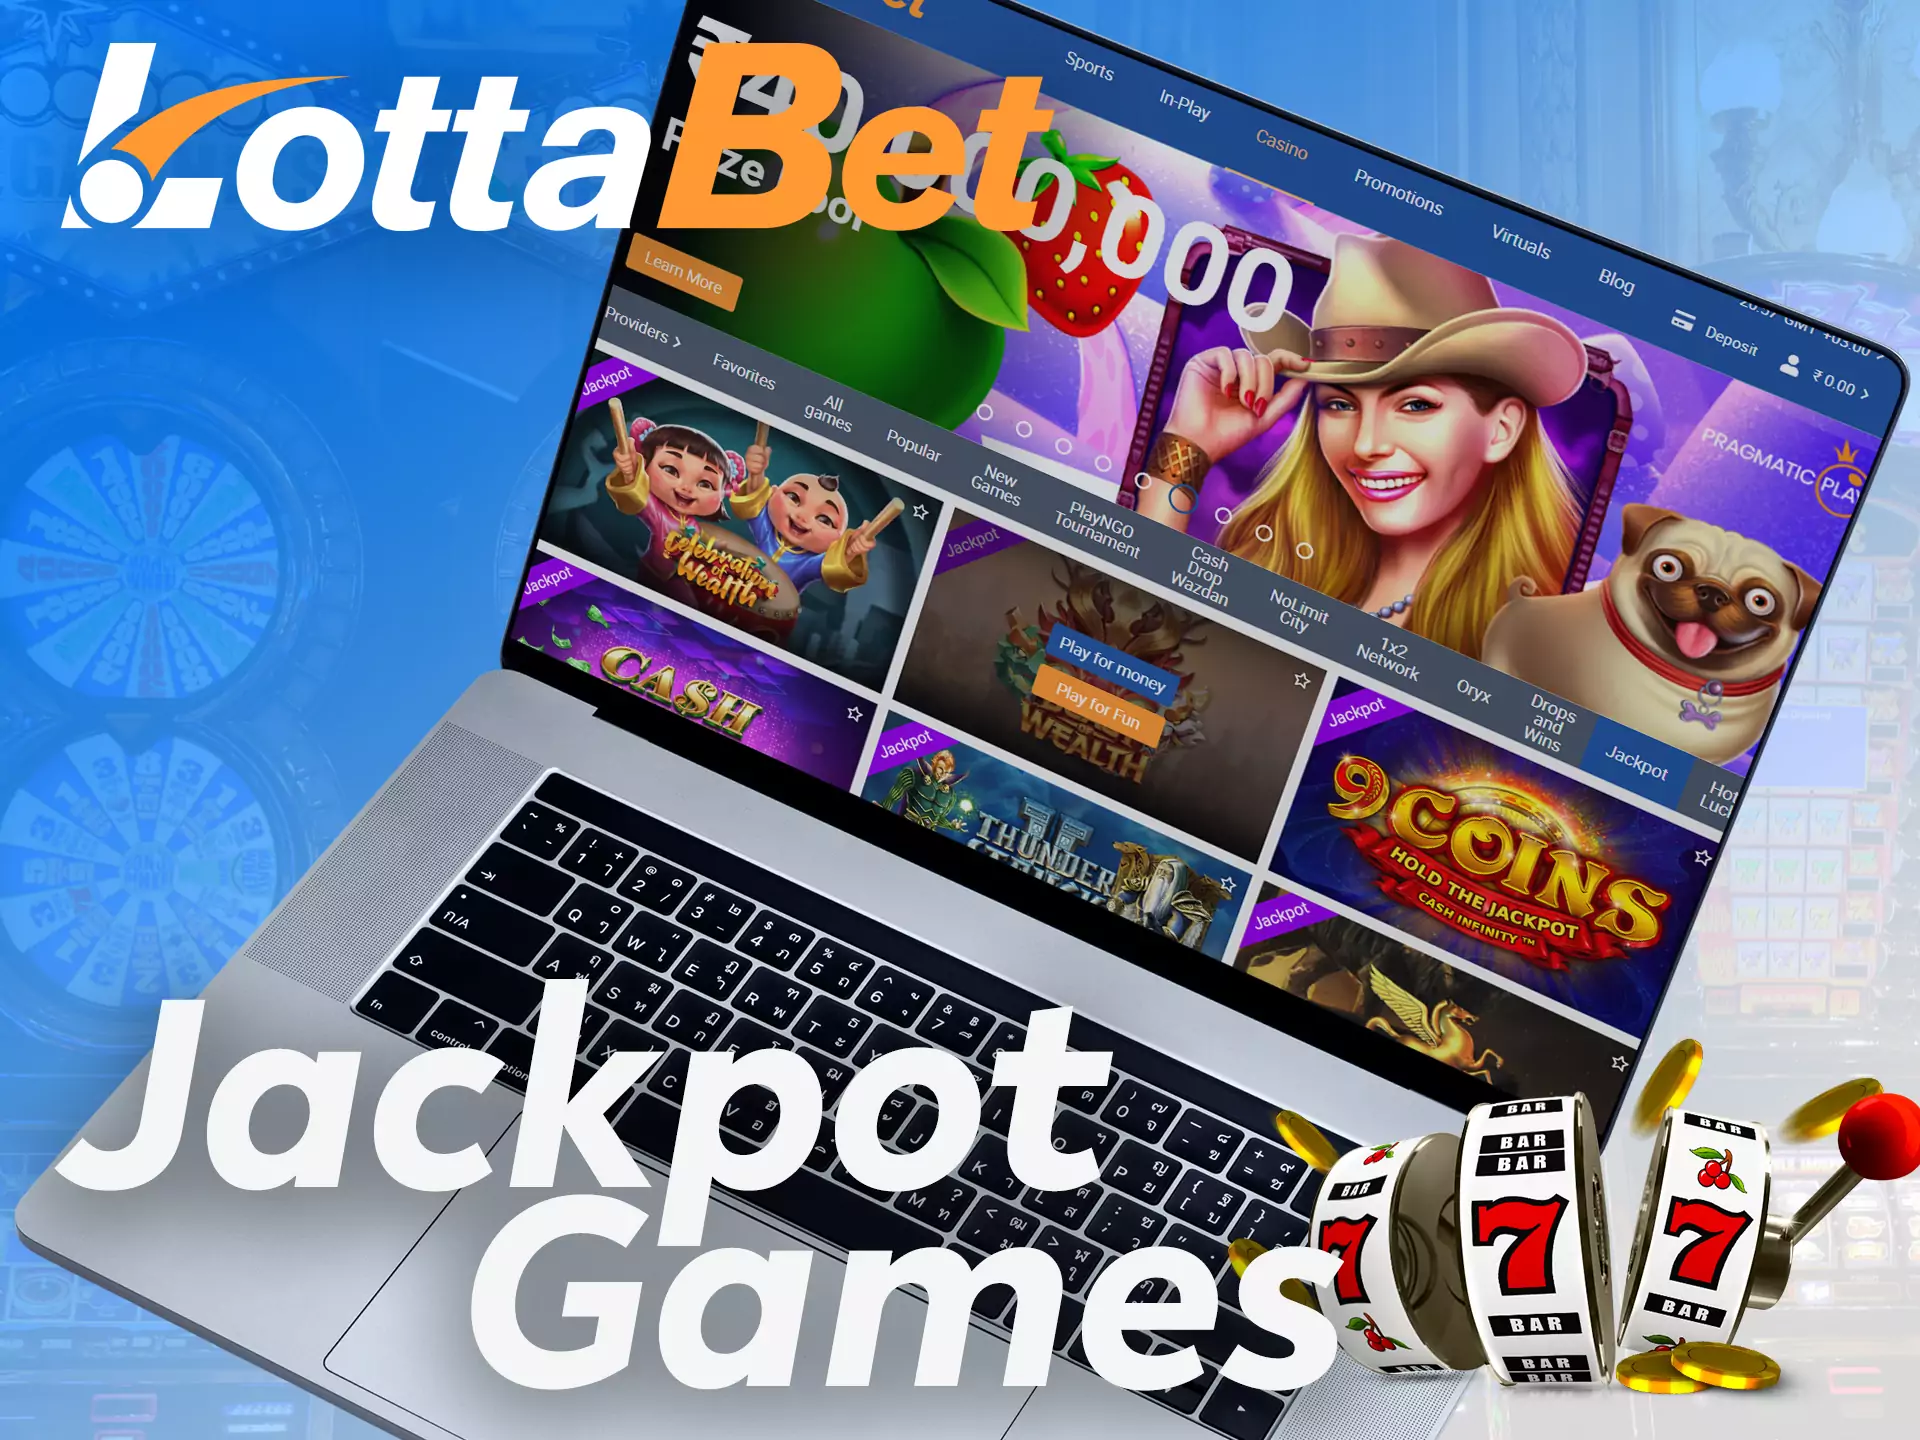 To win a big jackpot in the Lottabet Casino, you definitely should try jackpot games.